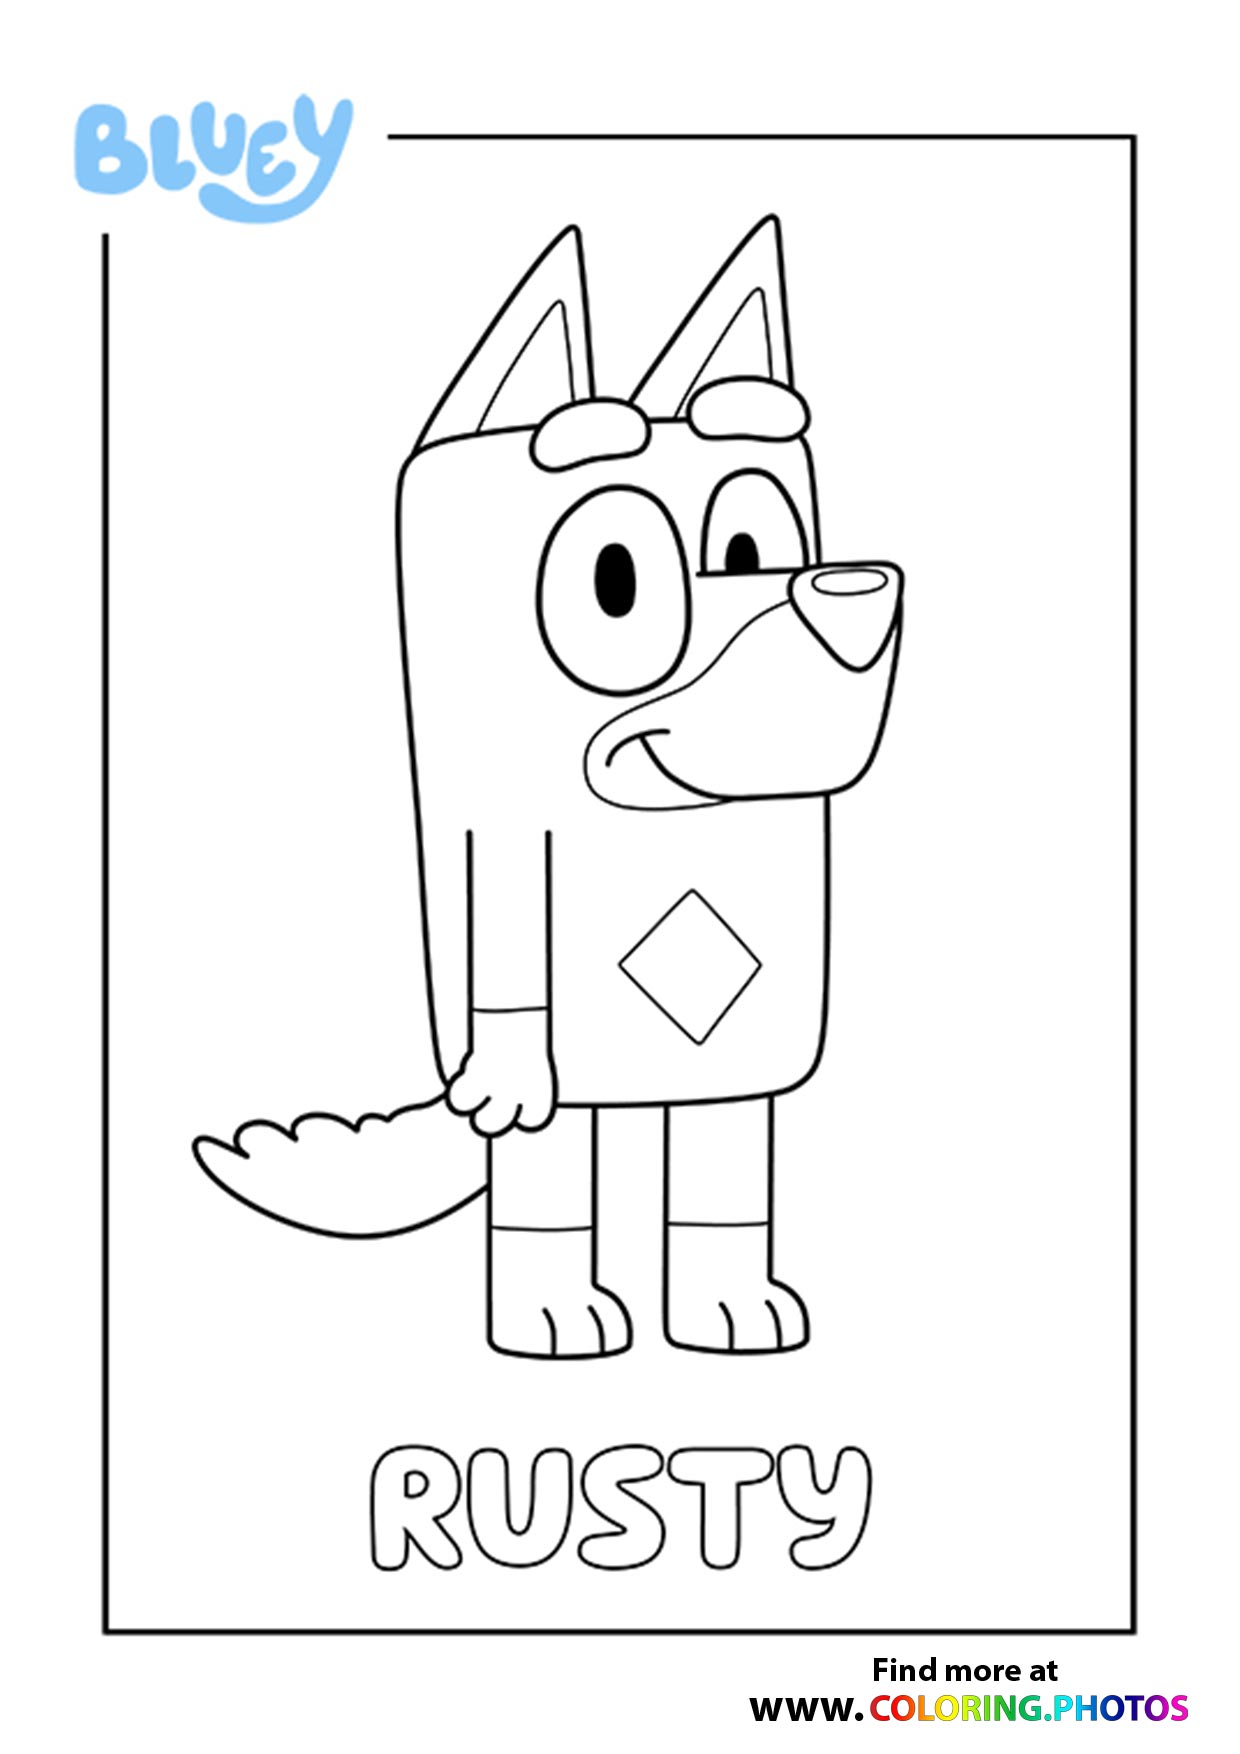 Bluey Rusty   Coloring Pages for kids